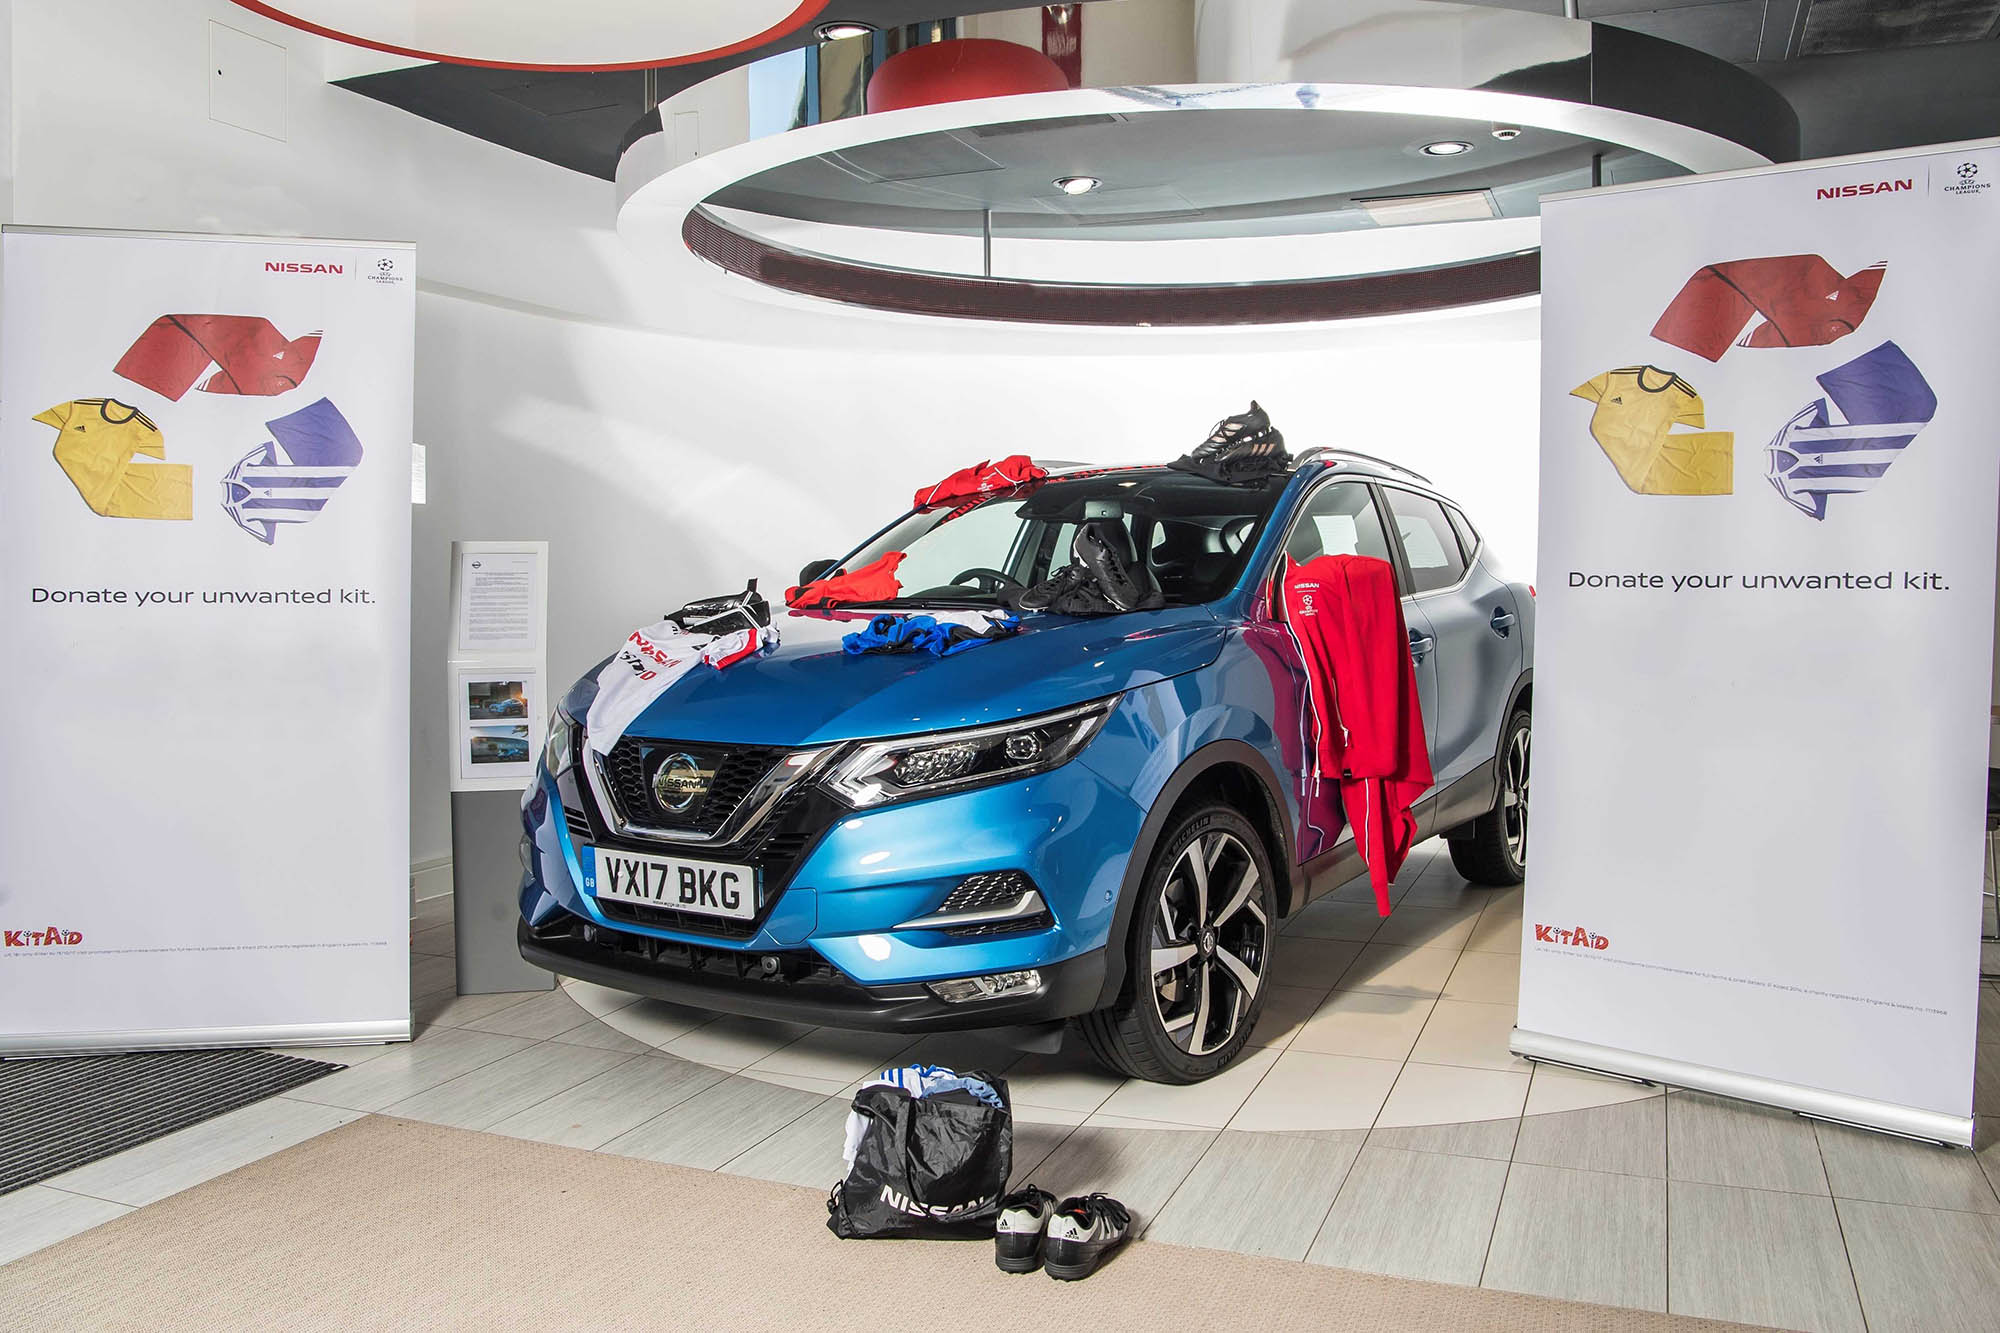 Nissan’s Drive To Boost Football Charity KitAid